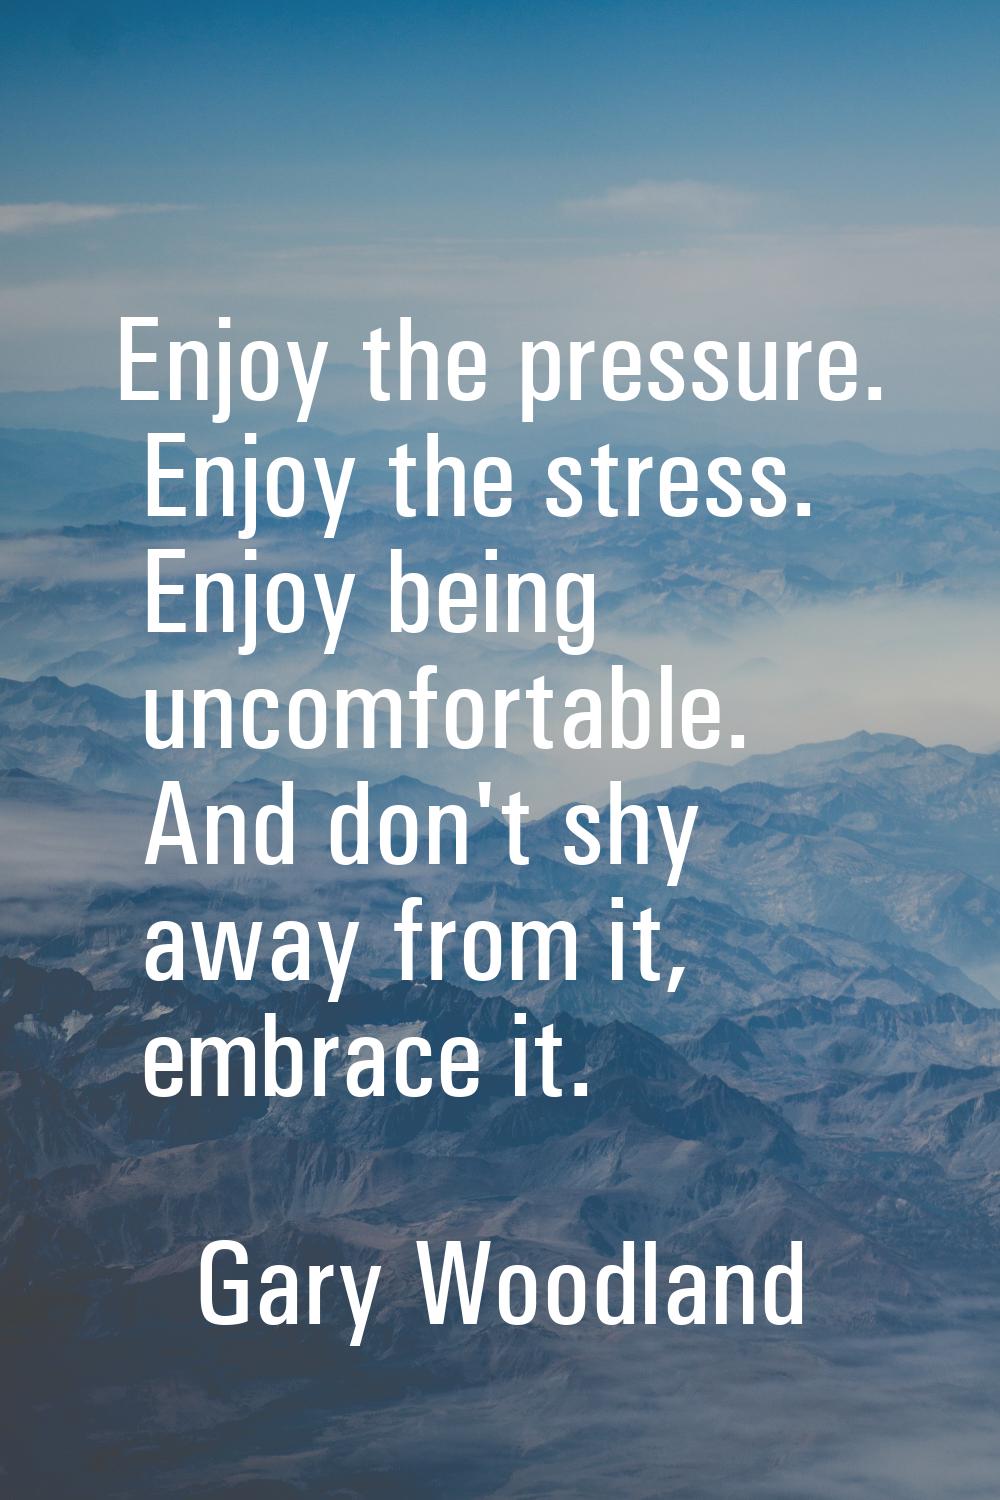 Enjoy the pressure. Enjoy the stress. Enjoy being uncomfortable. And don't shy away from it, embrac